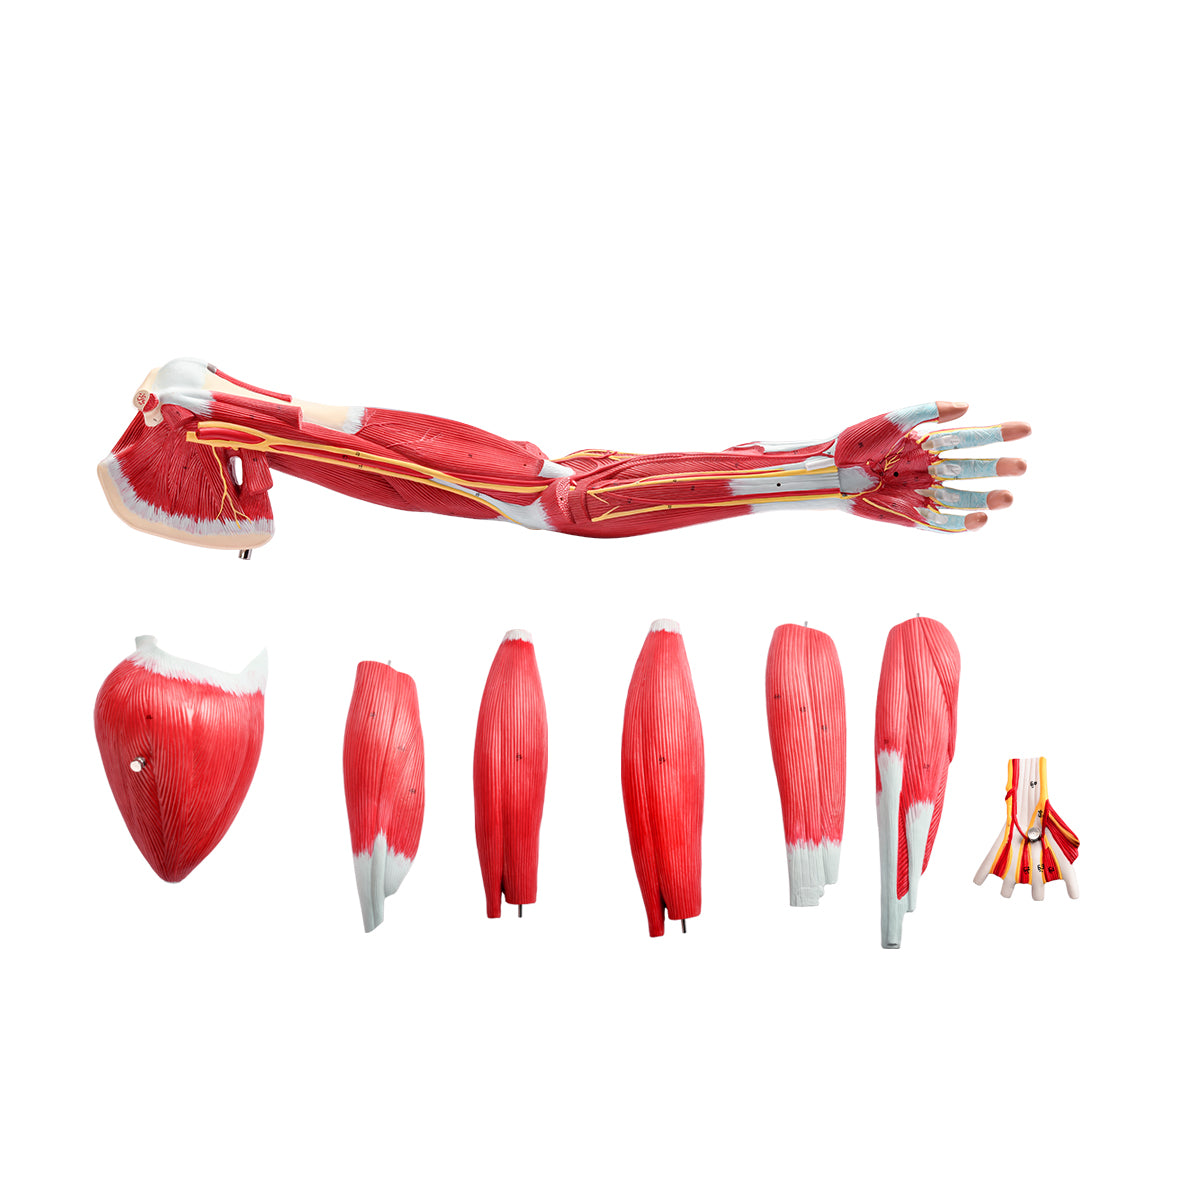 Evotech Scientific Anatomical Muscular Arm Model, Life Size, 7 Parts